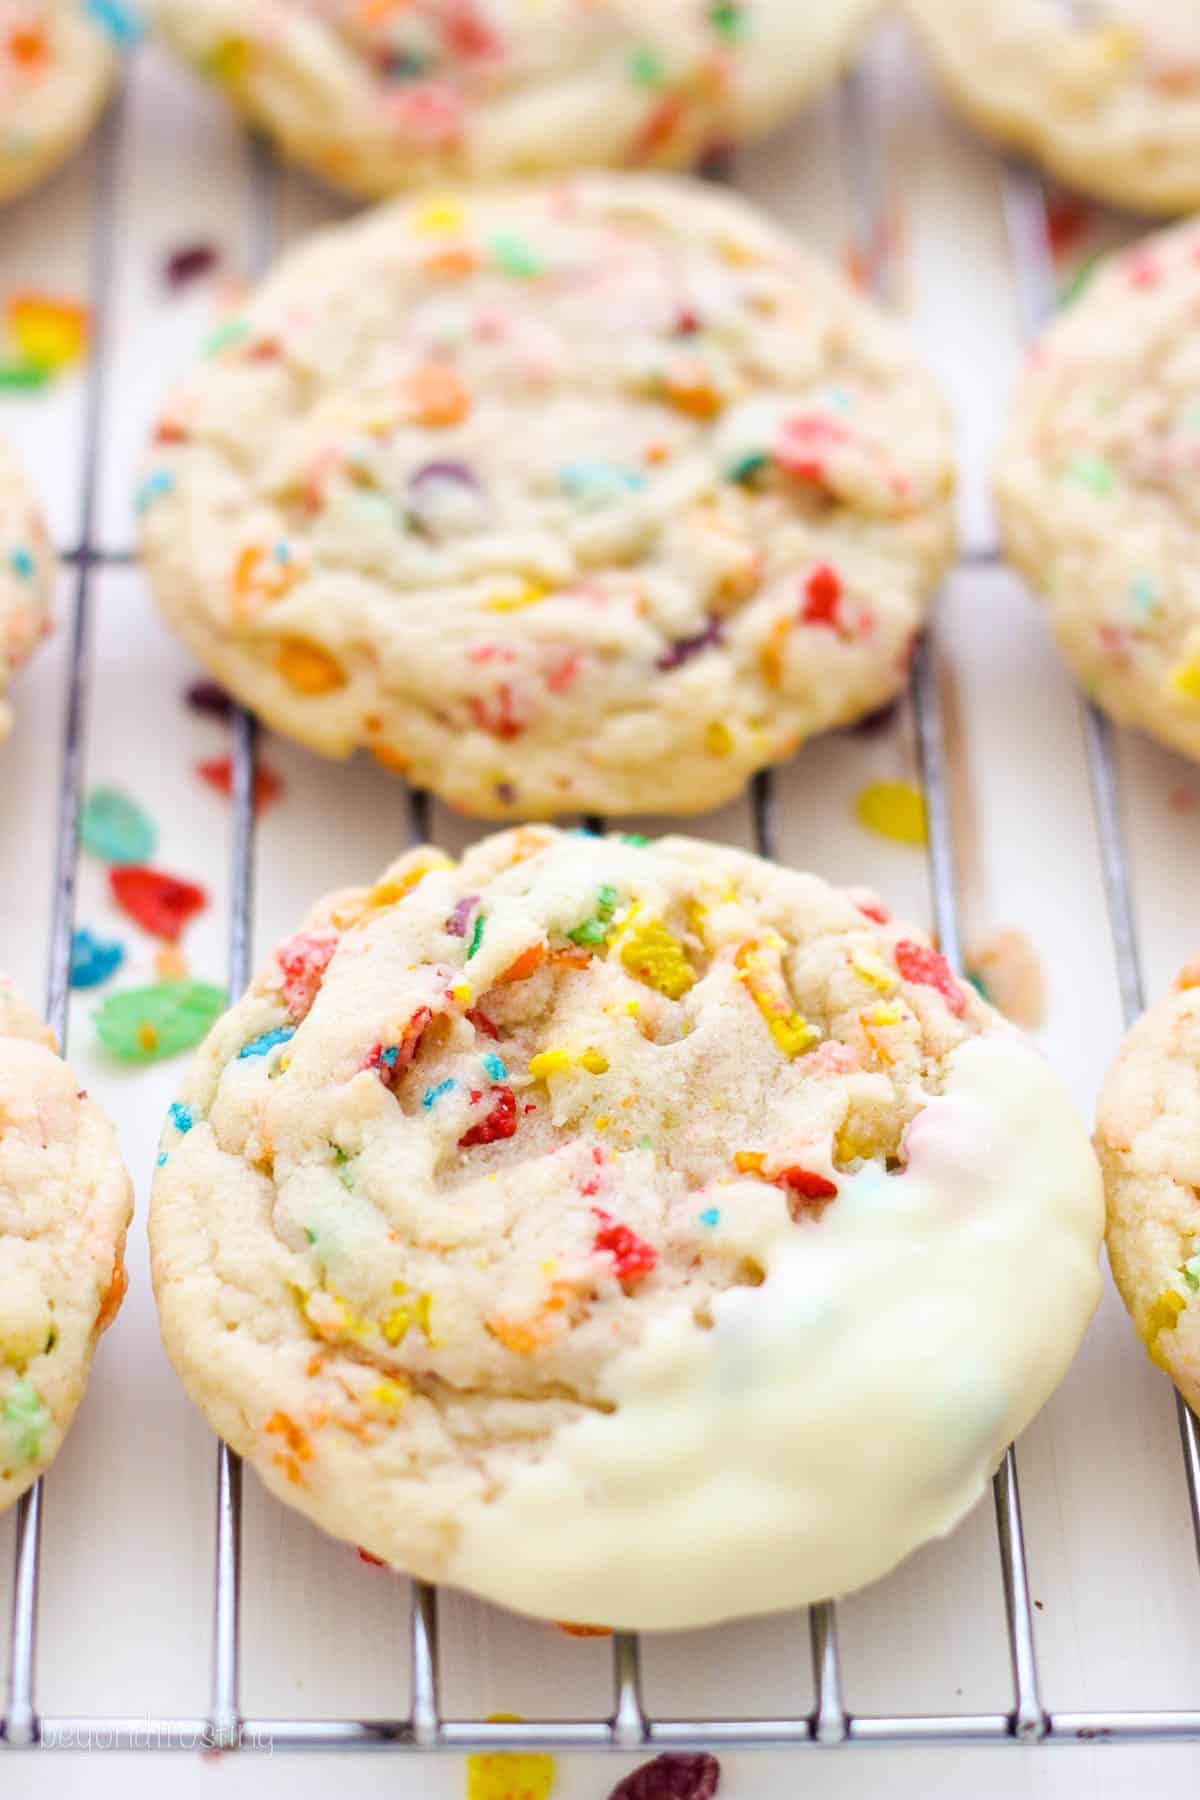 White chocolate-dipped Fruity Pebble sugar cookies in rows on a wire rack.